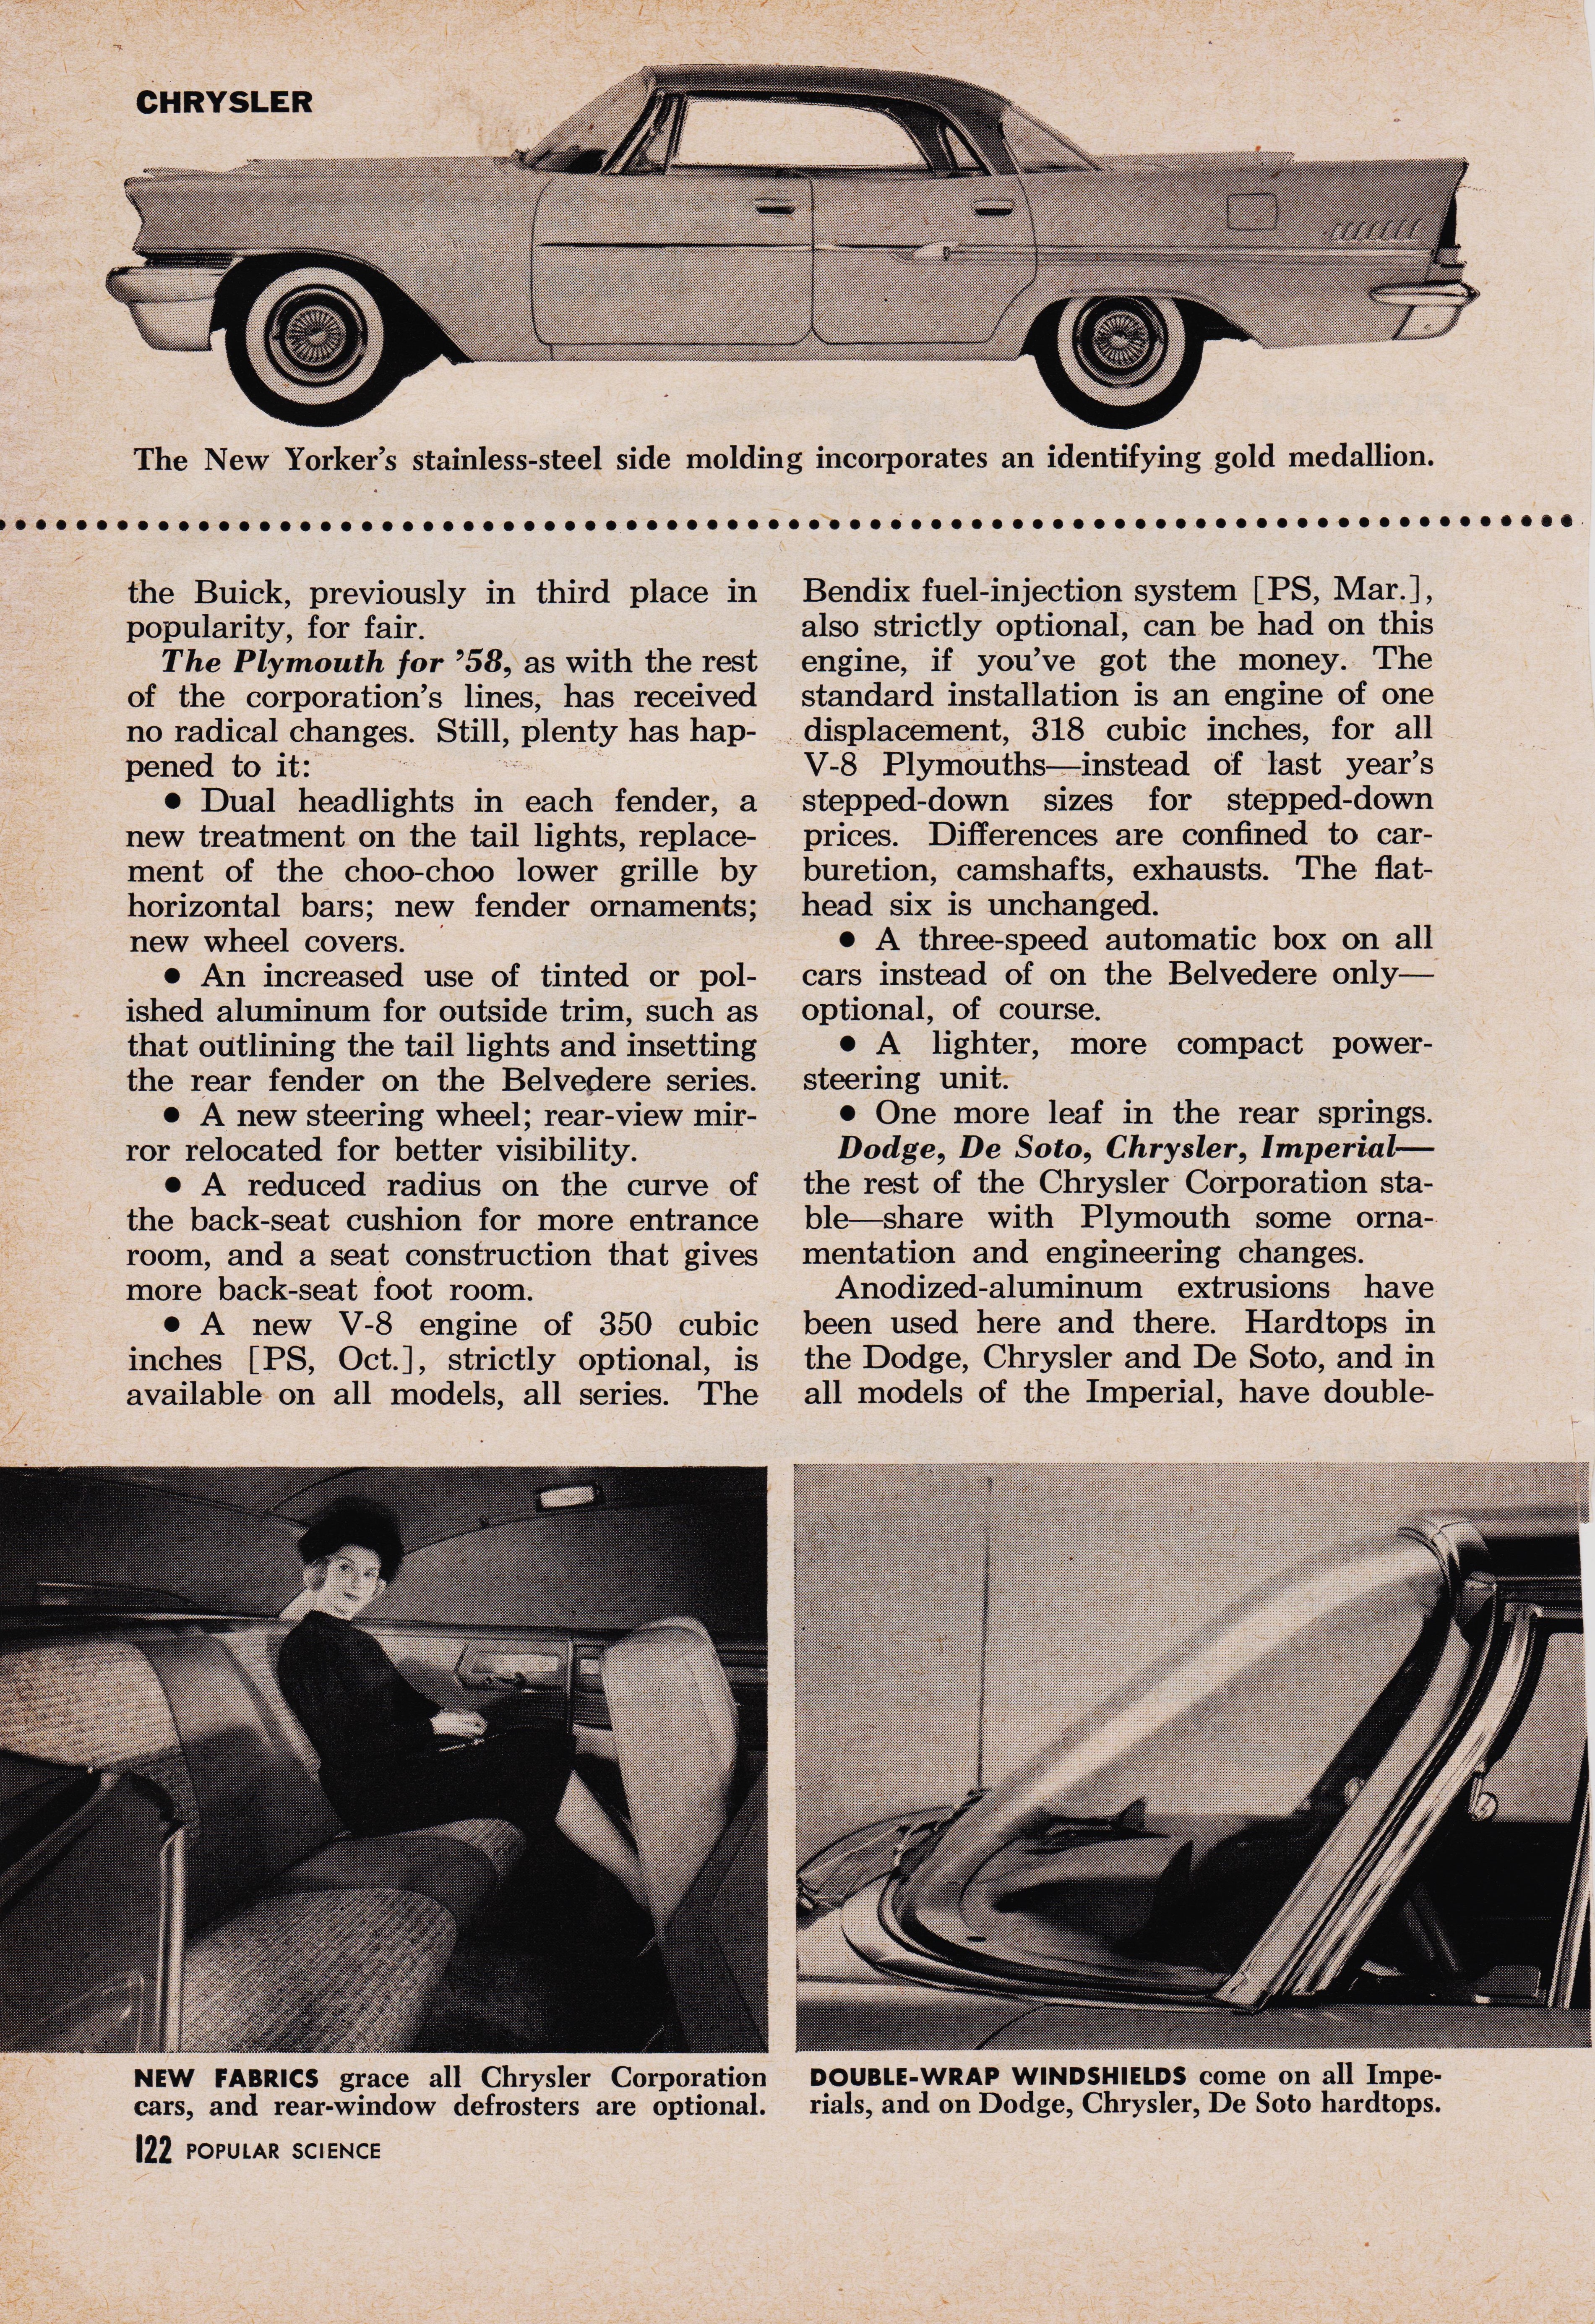 https://www.antiquemachinery.com/images-Popular-Science/Scientific-American-1958-pg-248-Lincoln-Worlds-Longest-Car.jpeg